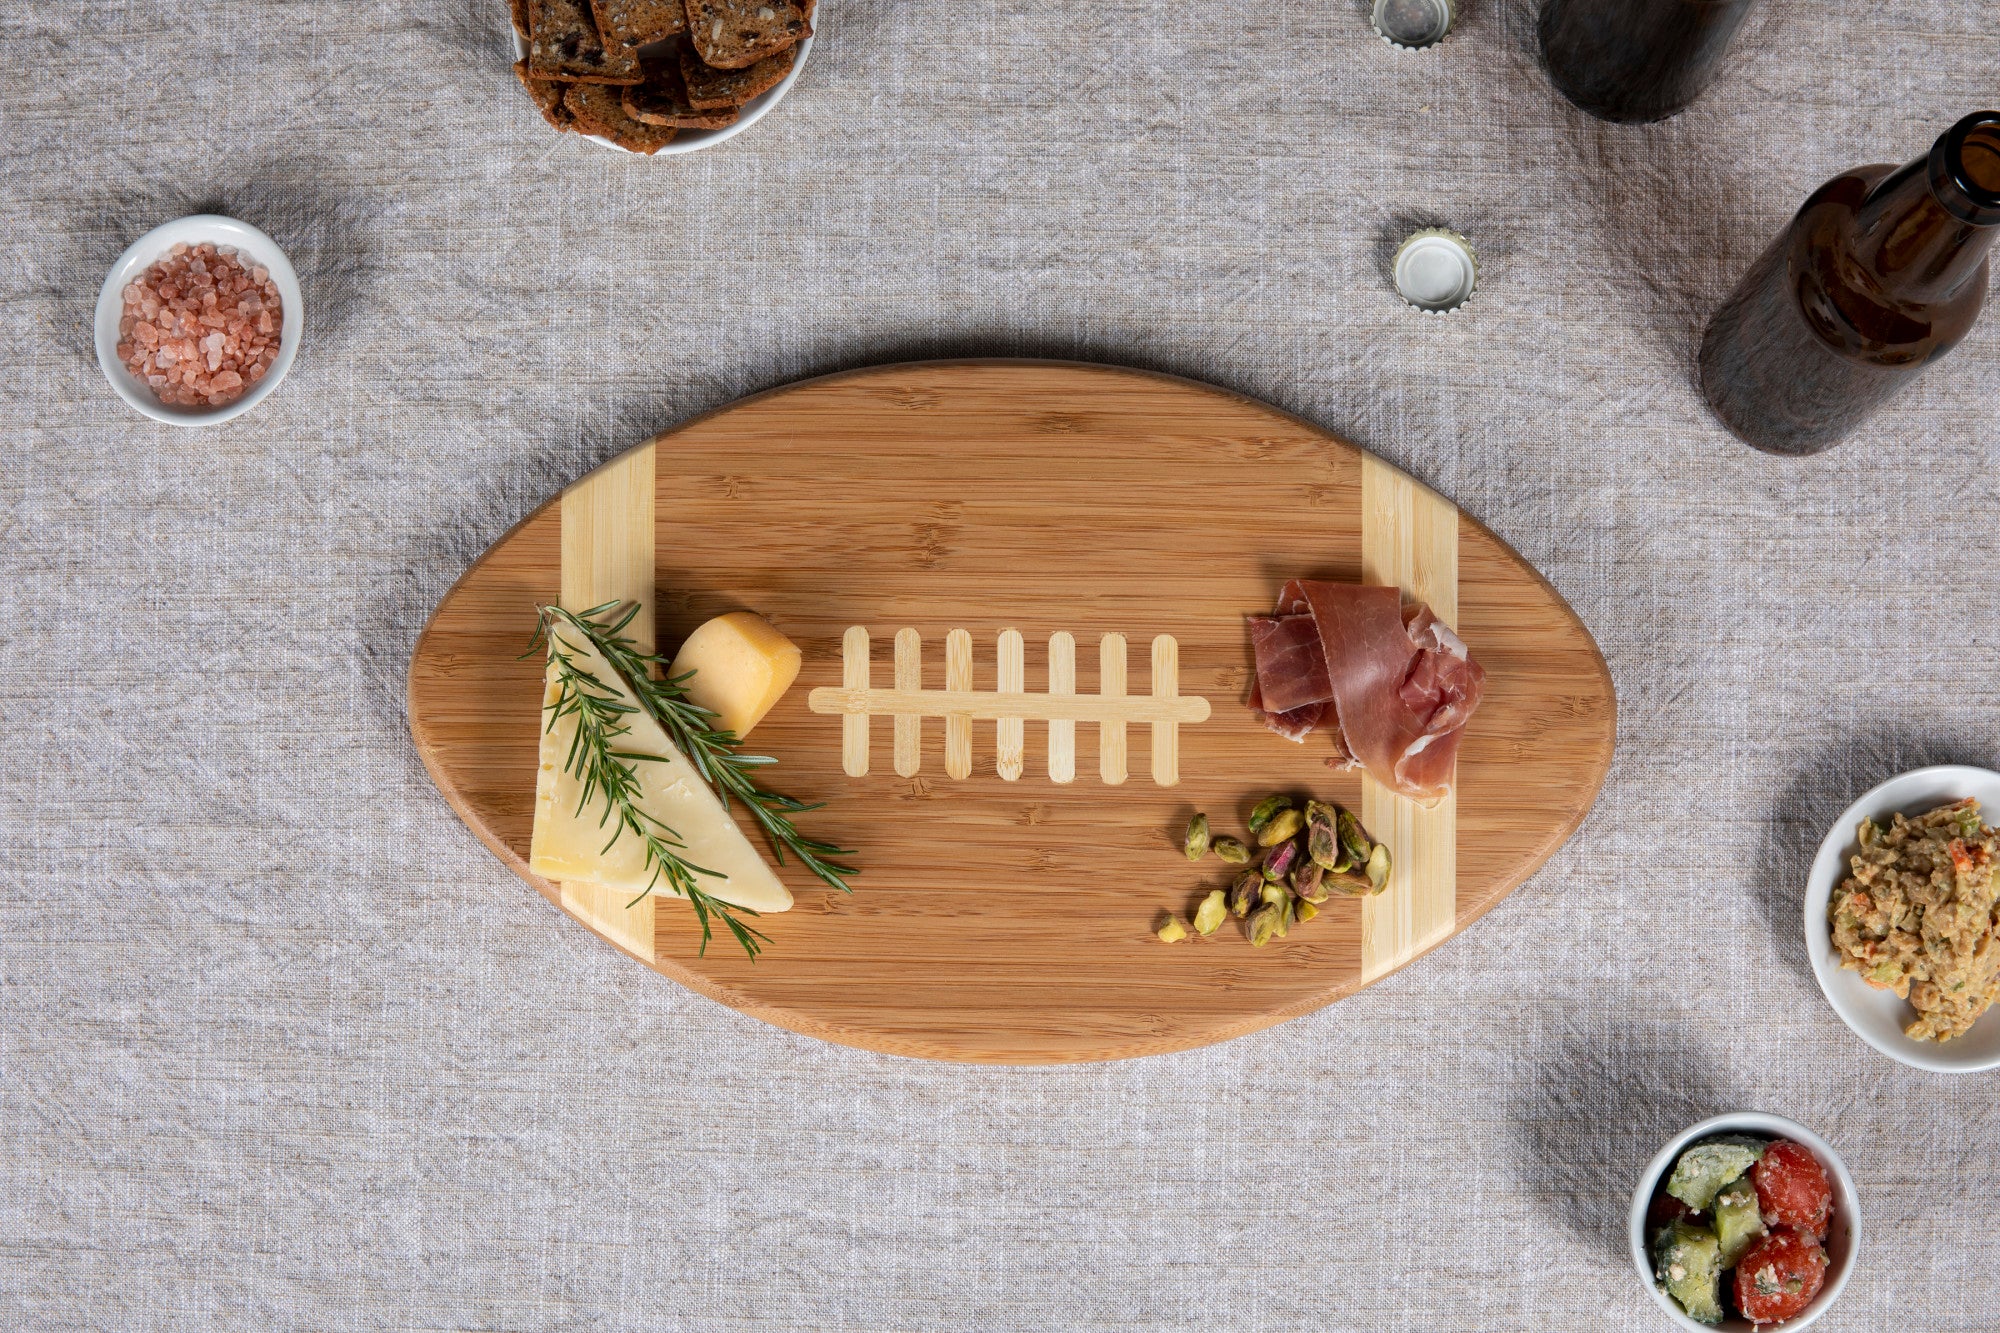 Army Black Knights - Touchdown! Football Cutting Board & Serving Tray